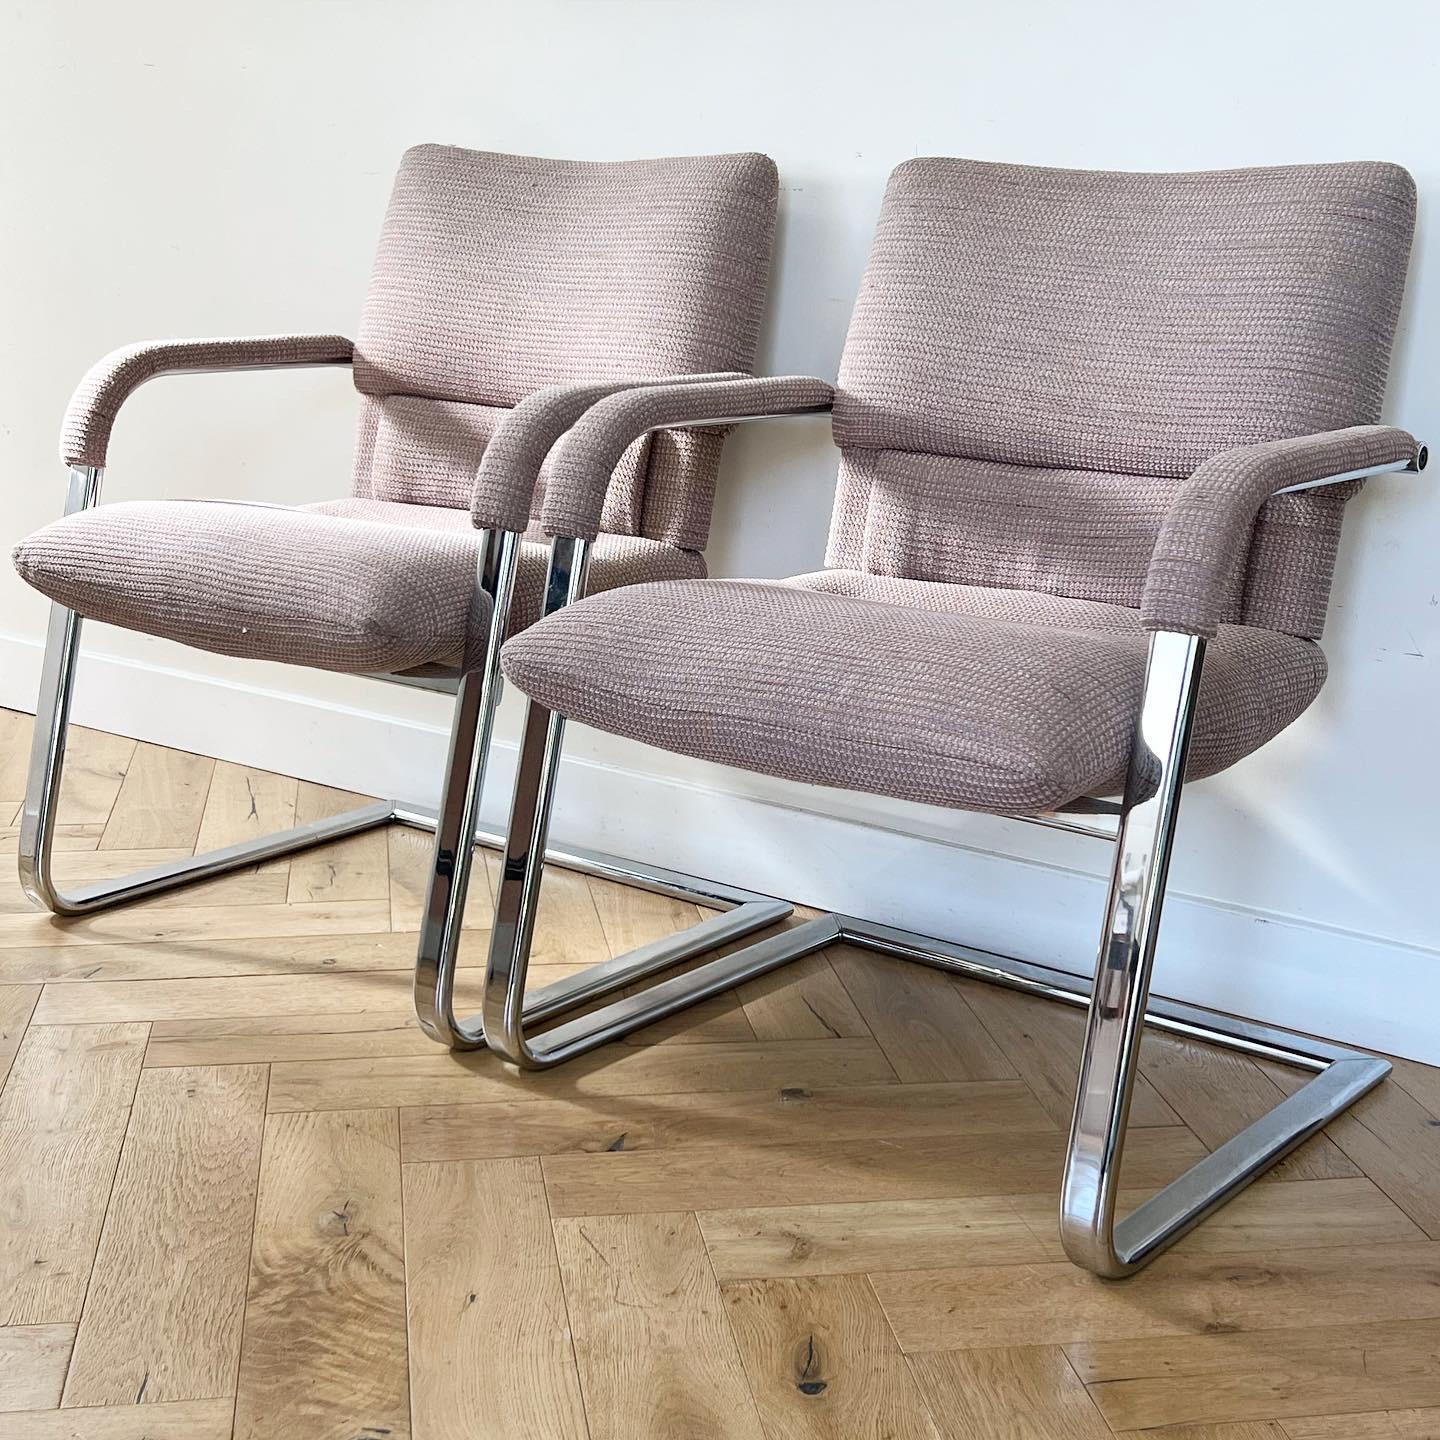 A pair of modernist cantilever lounge, club, or conference chairs by Mario Bellini for Vitra, signed, 1989. Made in Italy. D’après the iconic 1920s Bauhaus prototype. Chrome frames with original bouclé / tweed blend upholstery in tones of peony and